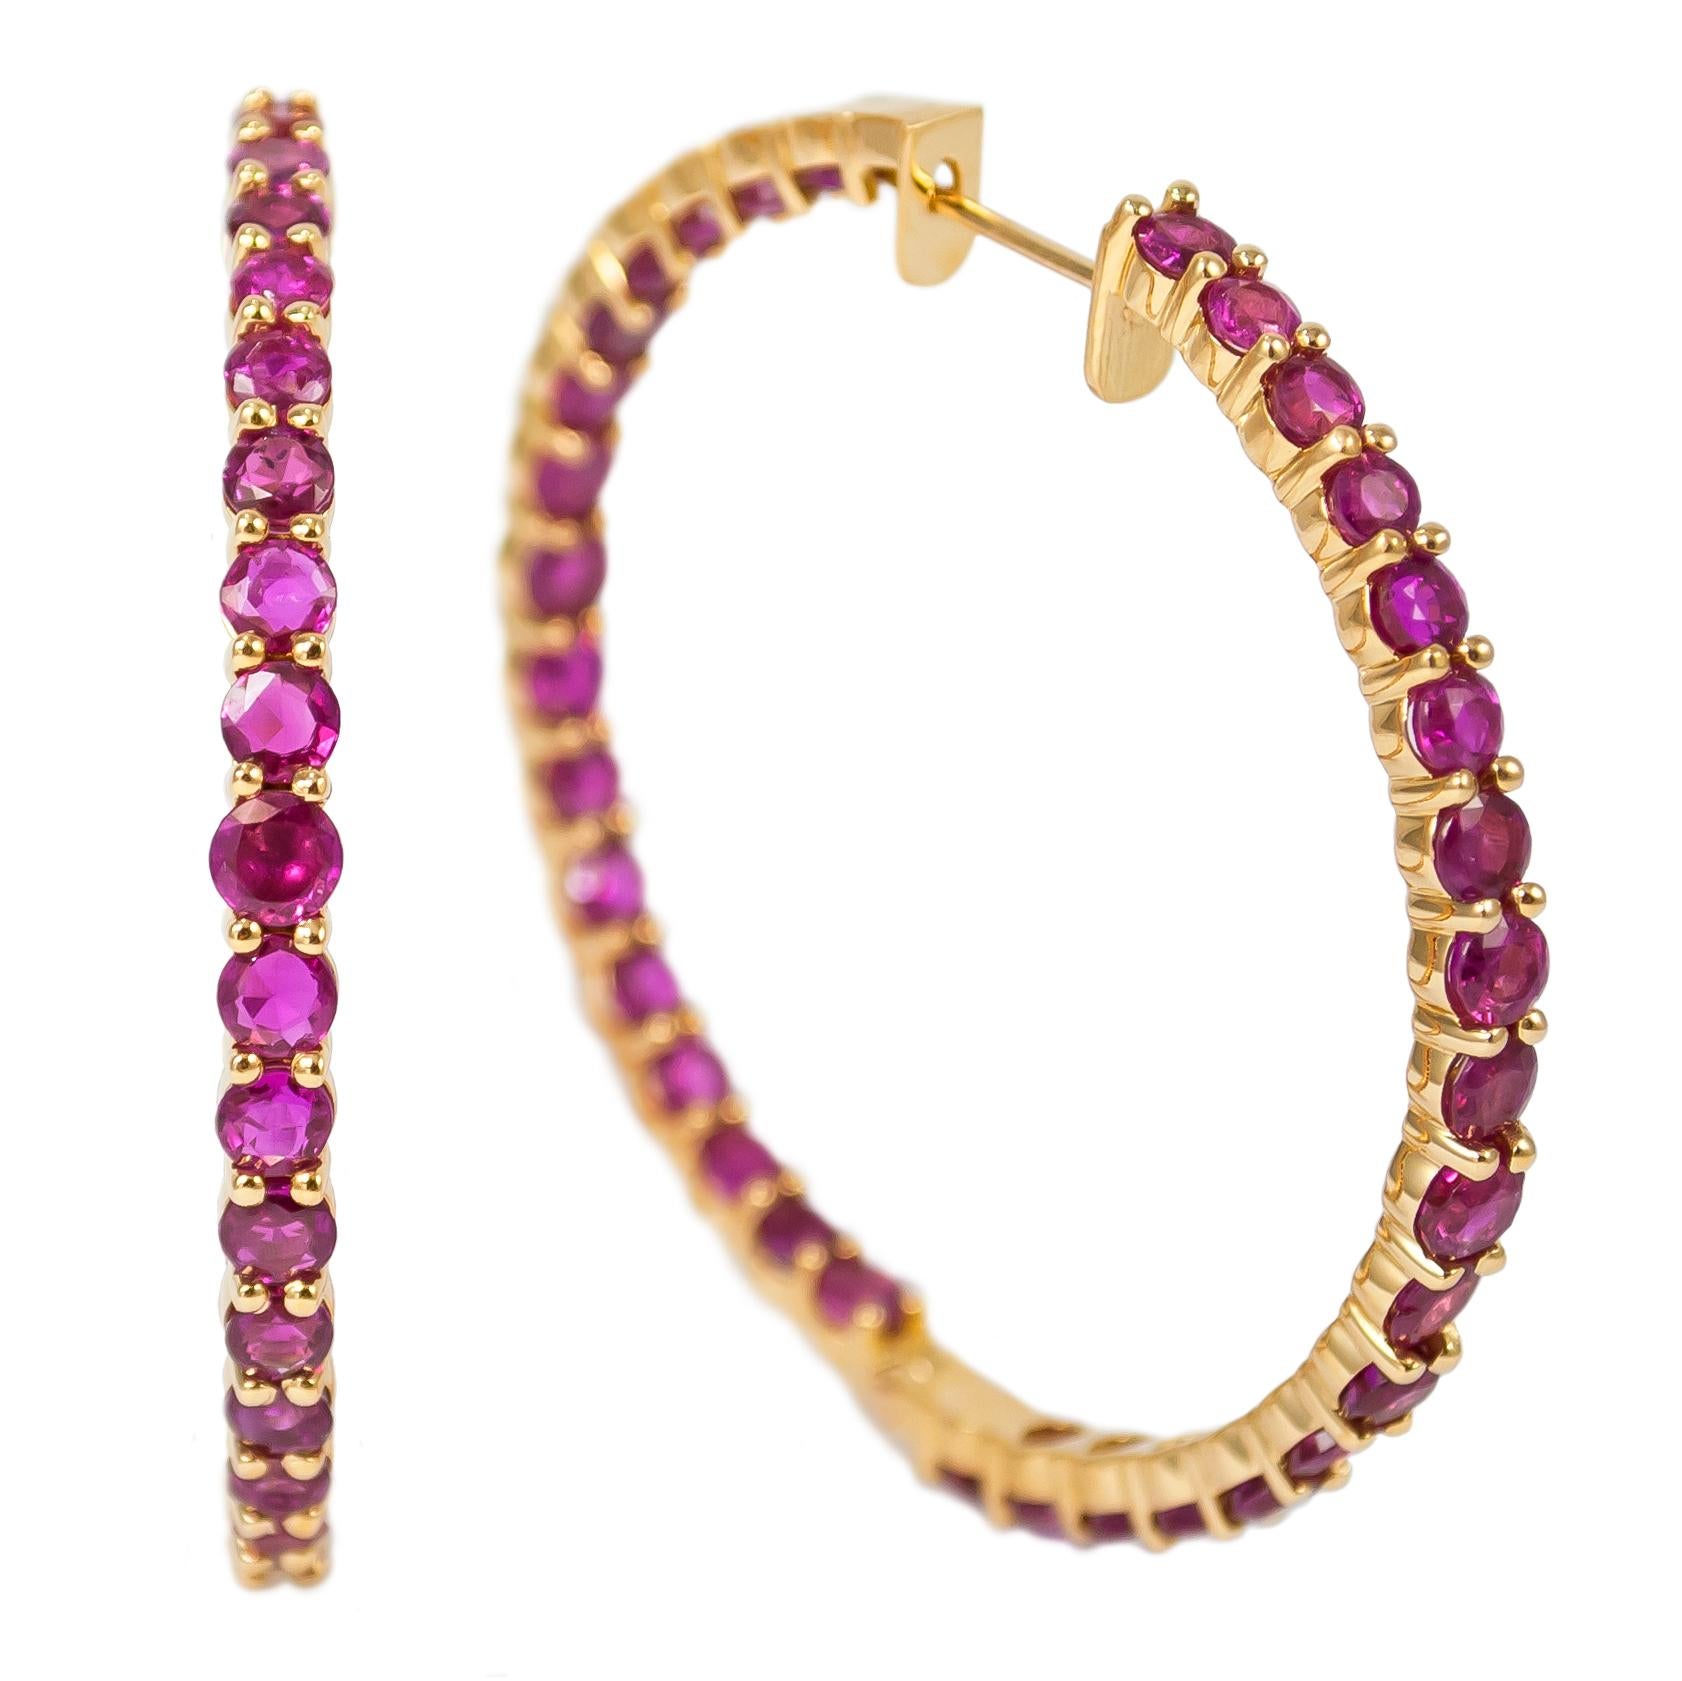 Passionate rubies are set along the inside and outside edges of these 18K yellow gold, handmade hoop earrings. With an eye to detailing, these J. Birnbach originals are the perfect way to jazz up any look and make an equally charming gift for that